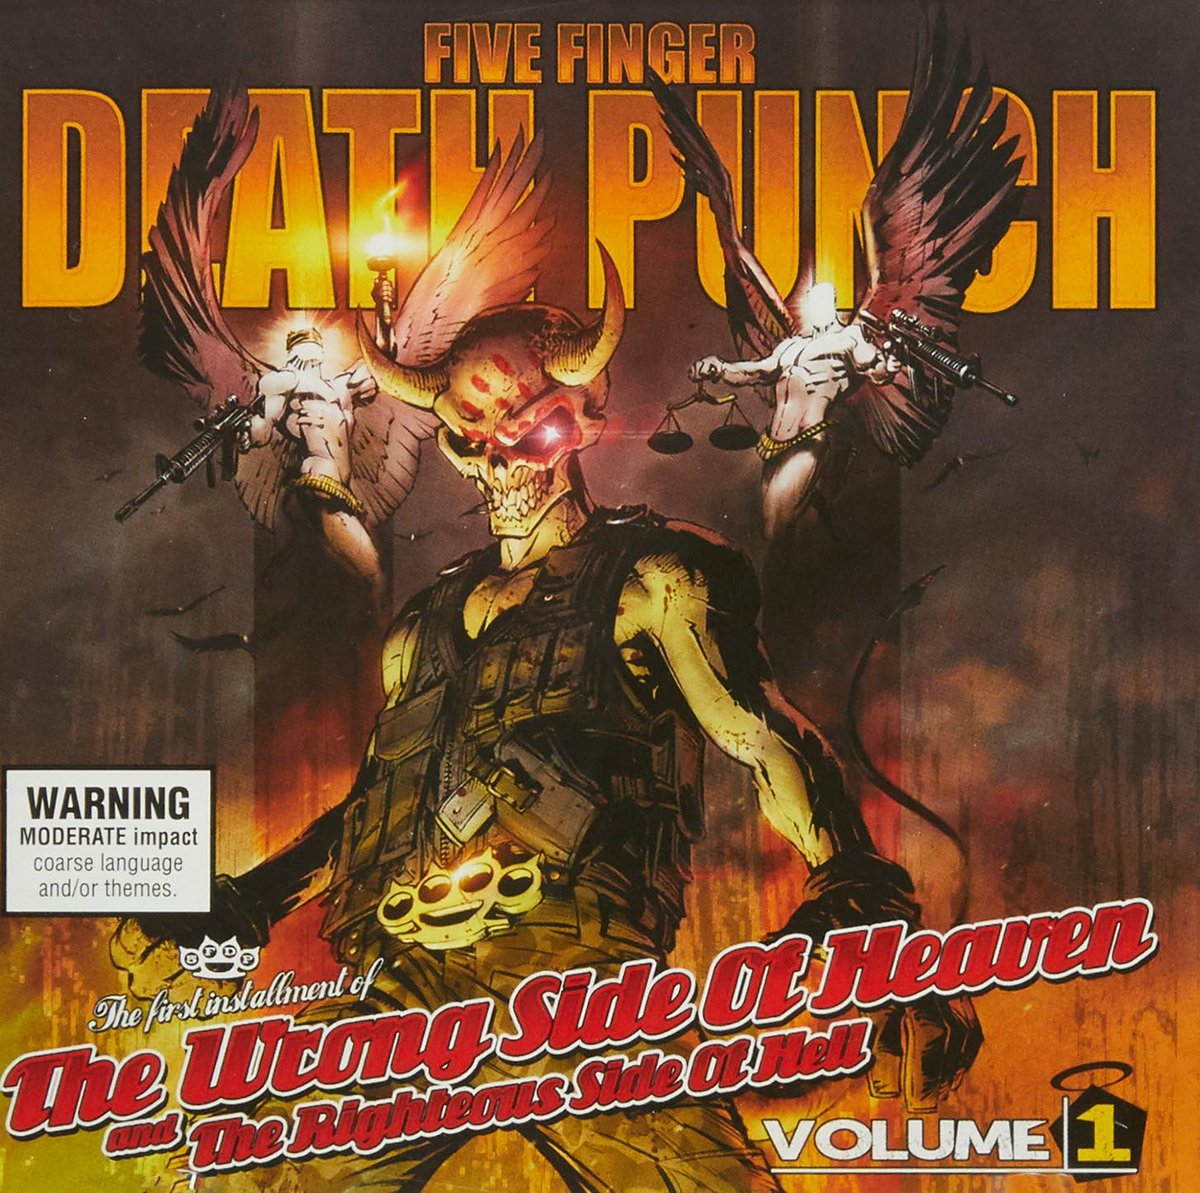 ★Five Finger Death Punch - M.I.N.E. (End This Way) (2013) 

▶️youtube.com/watch?v=W7-u73…

もう一曲、いきますよ
独特の雰囲気が良いですね🤡
#FiveFingerDeathPunch
Album / Wrong Side Of Heaven & The Righteous Side Of Hell Vol.1